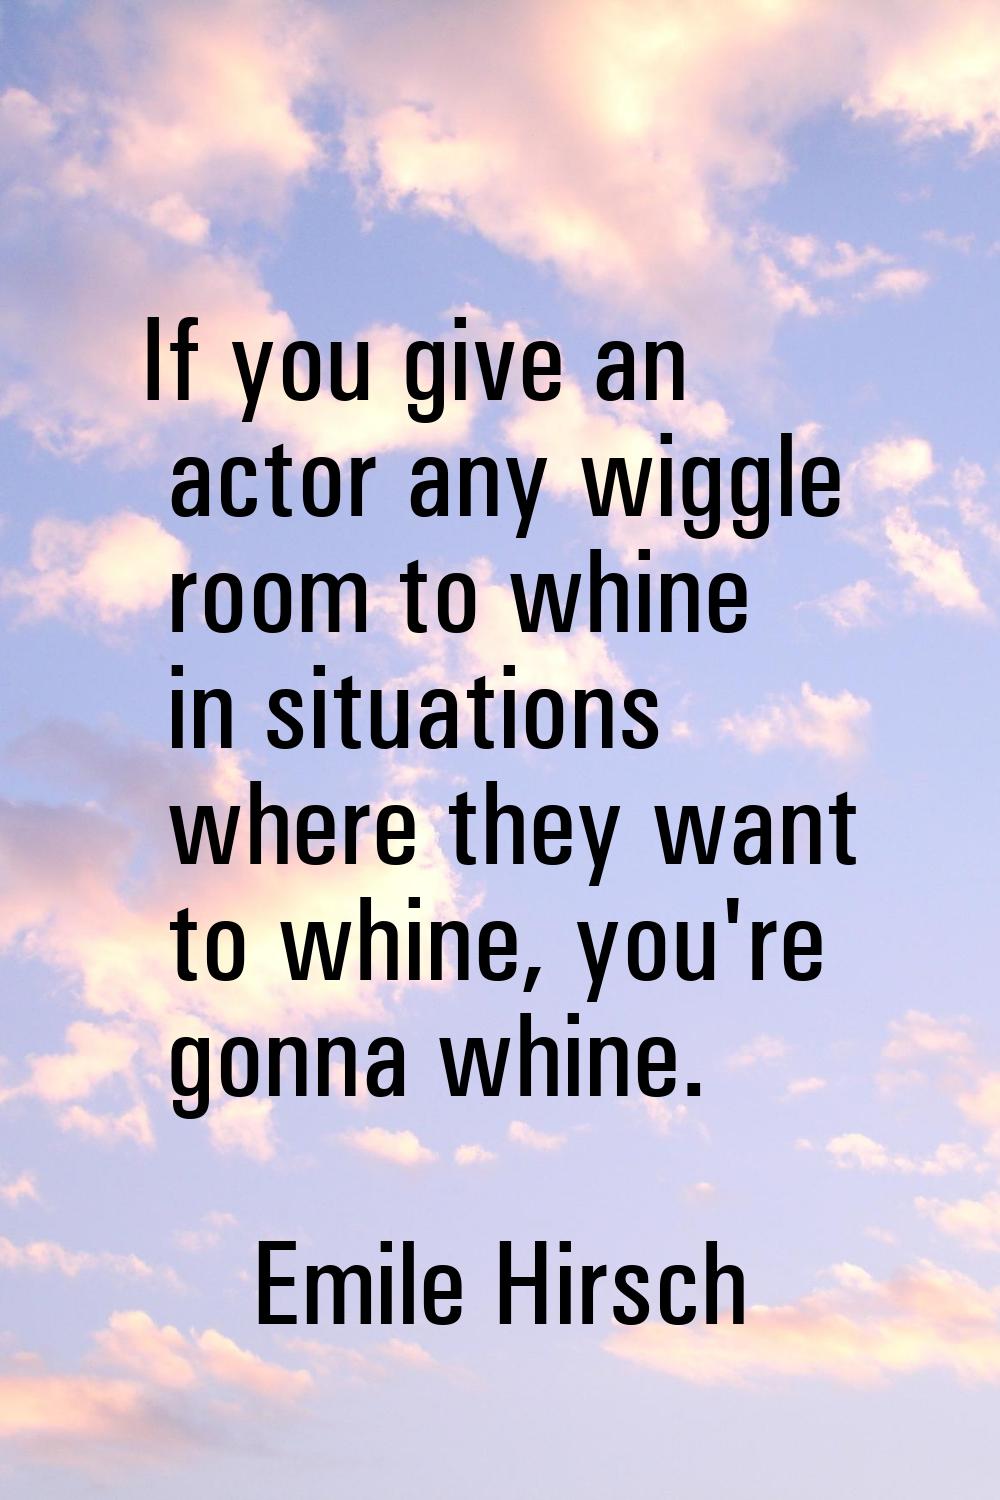 If you give an actor any wiggle room to whine in situations where they want to whine, you're gonna 